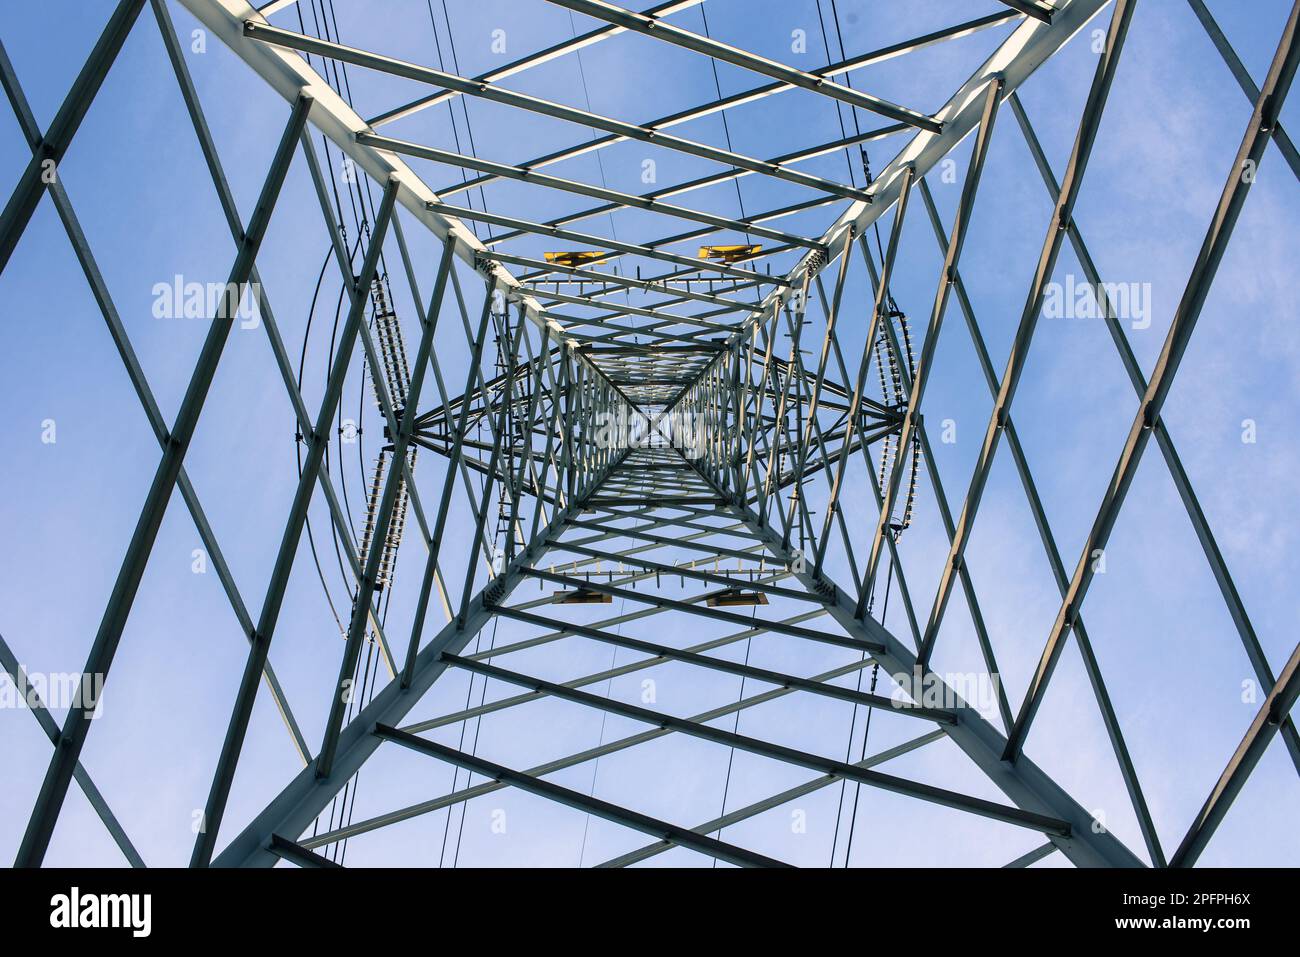 Traliccio elettrico. Electricity pylon. Metal structure for supporting high voltage electric cables. San Mauro Torinese, Torino, Italy Stock Photo